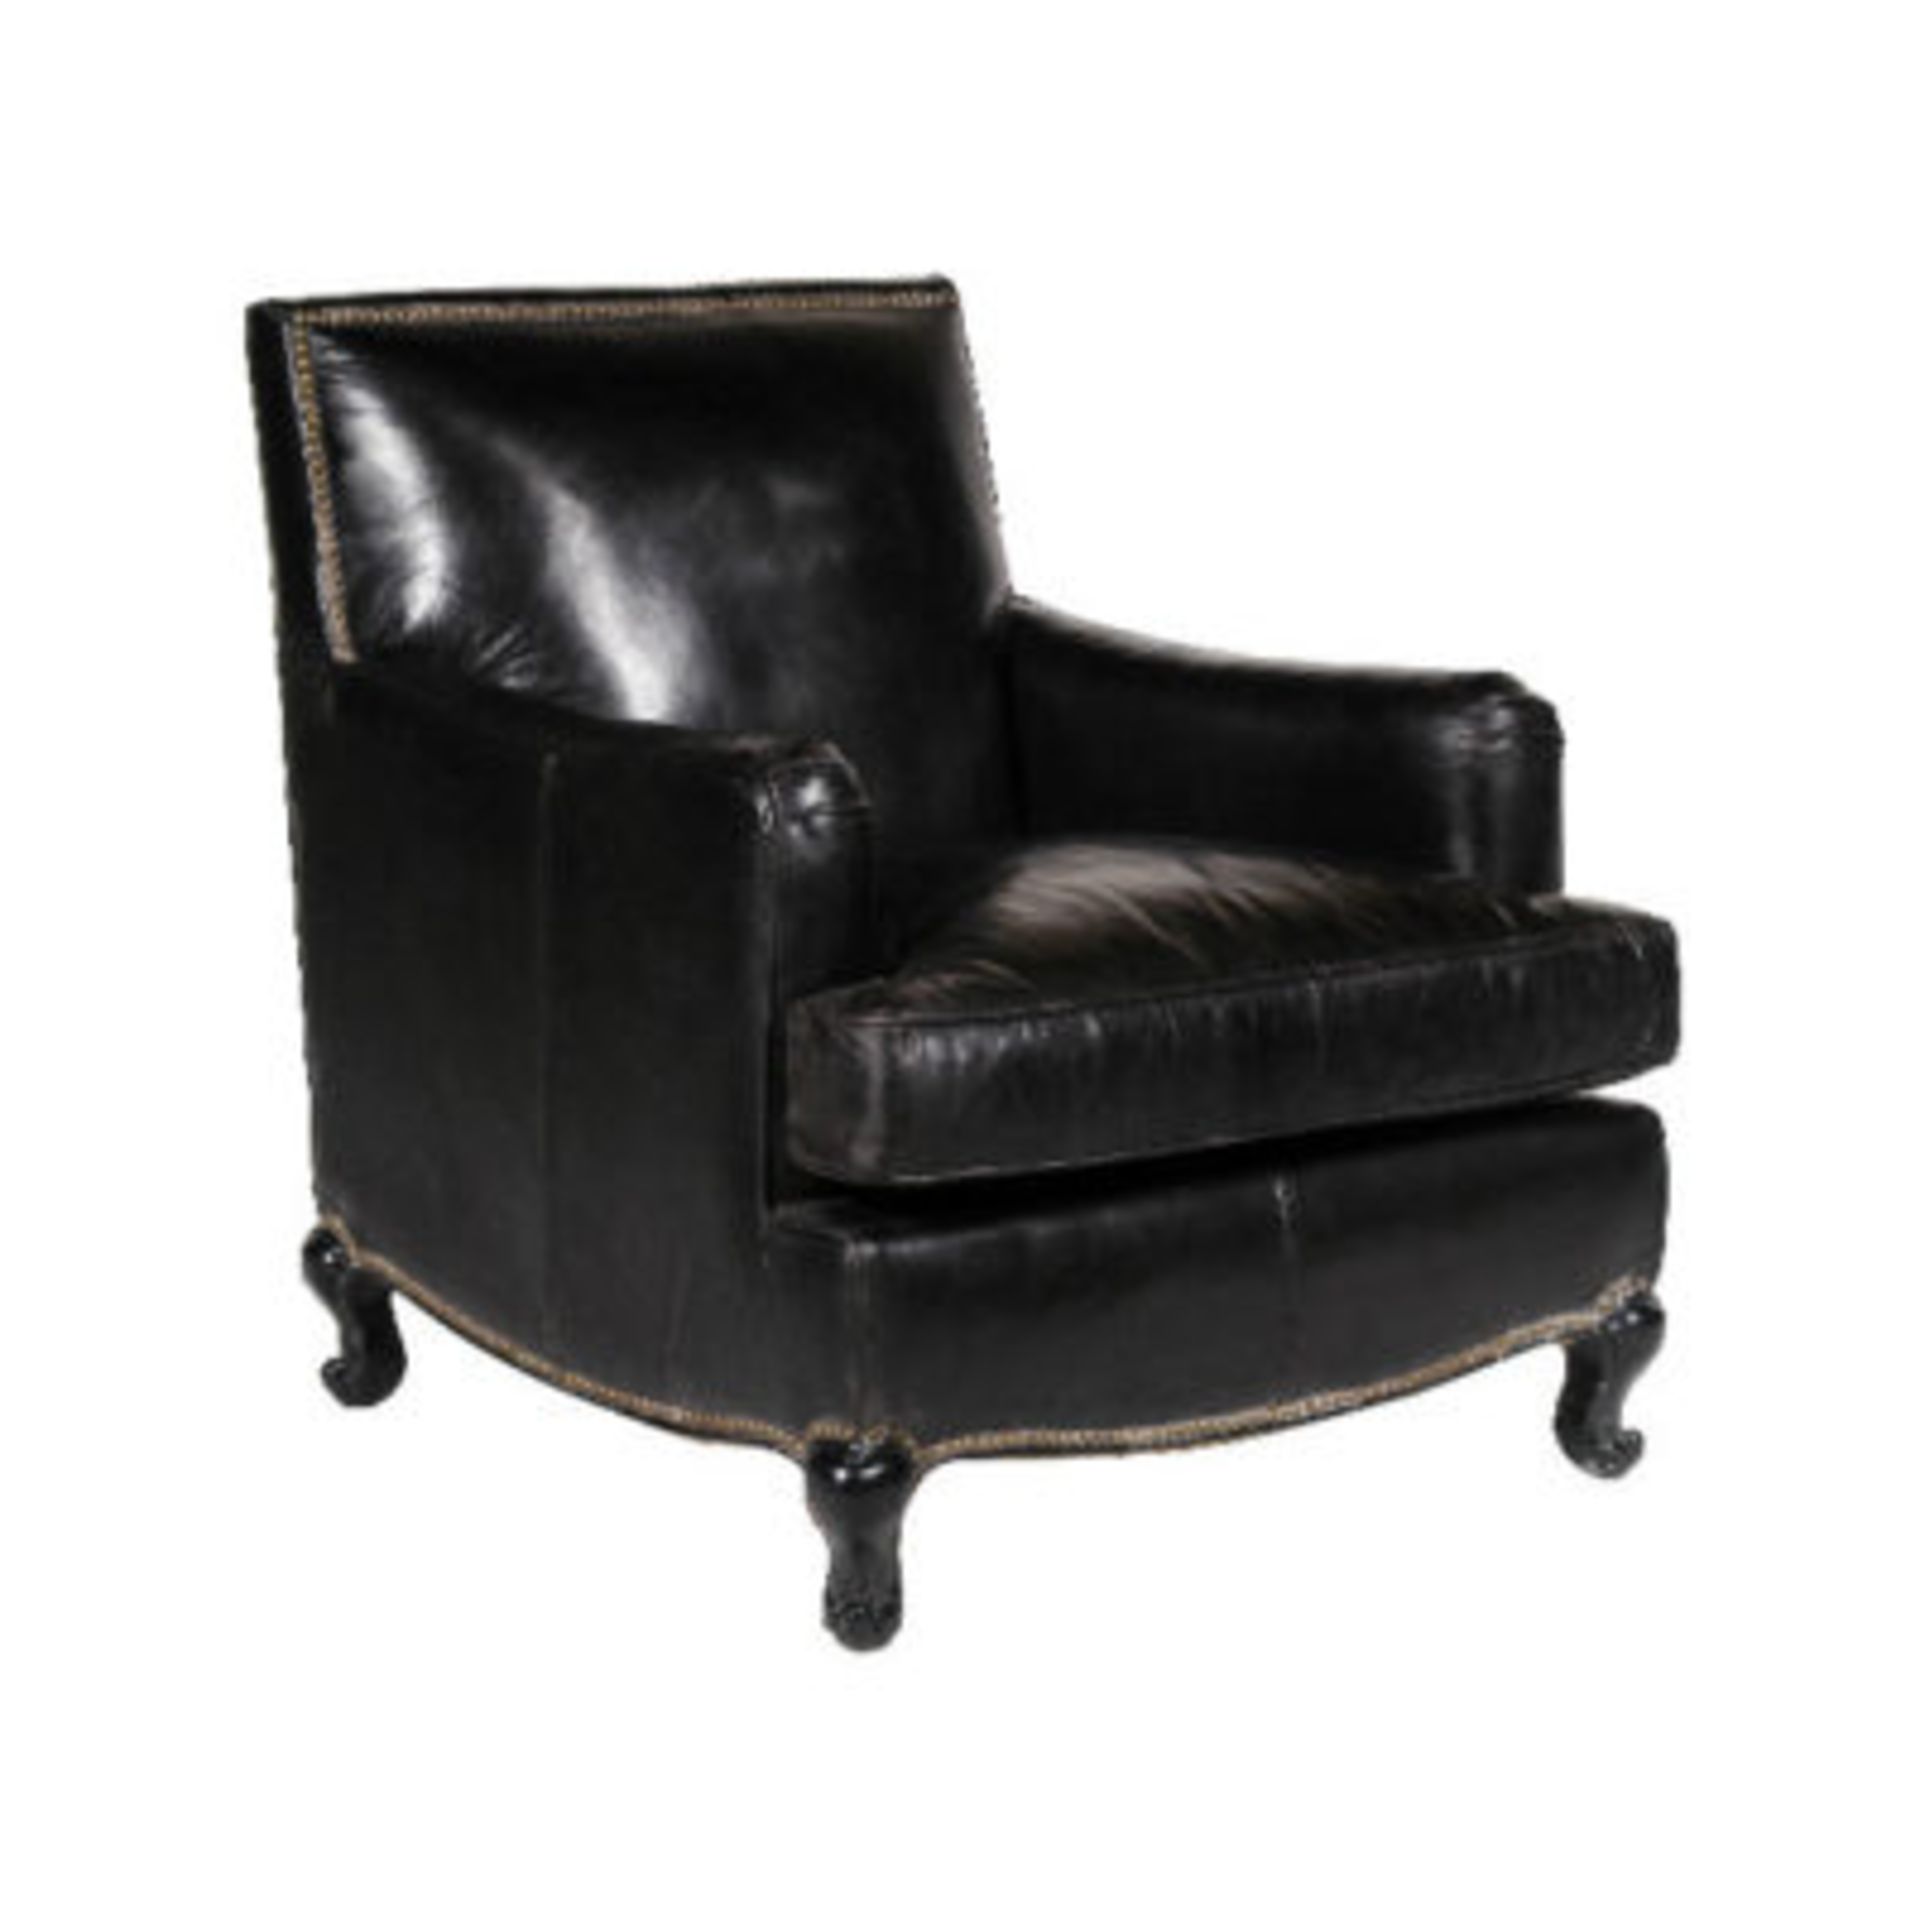 Cannes Armchair Old Saddle Black Leather Reminiscent Of Decadent Smoking Lounges, The Cannes - Image 2 of 2